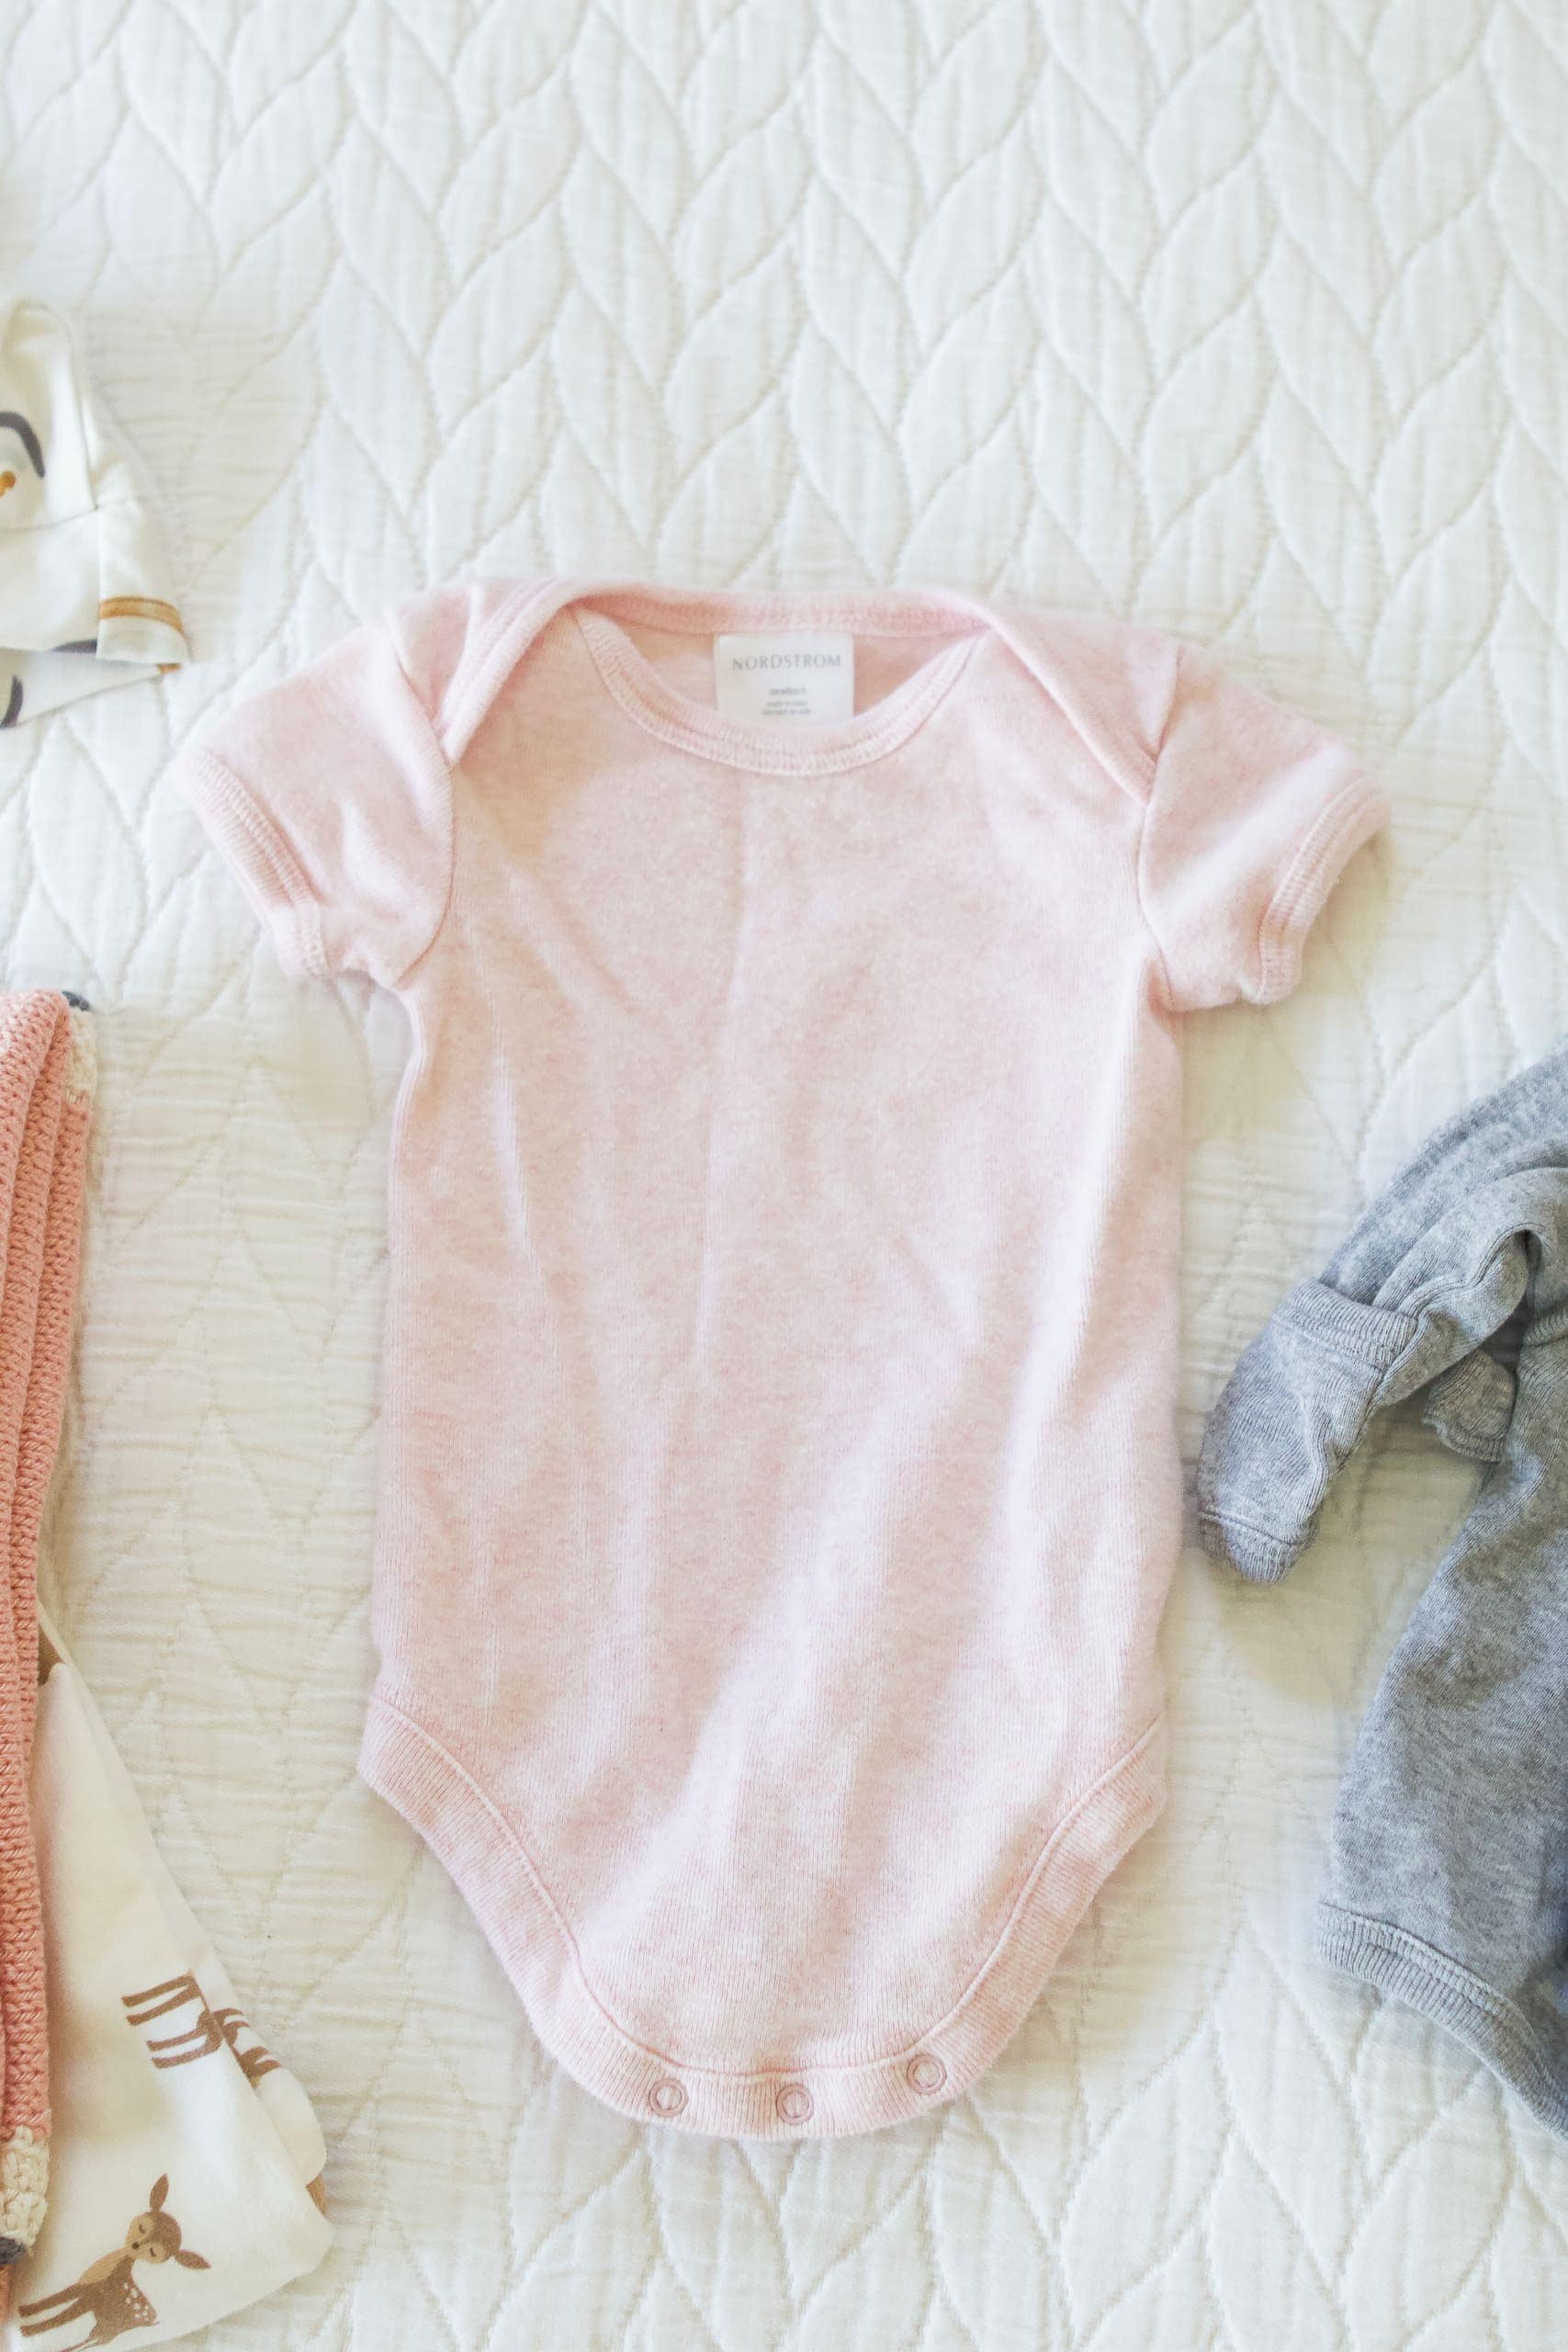 What to pack for baby